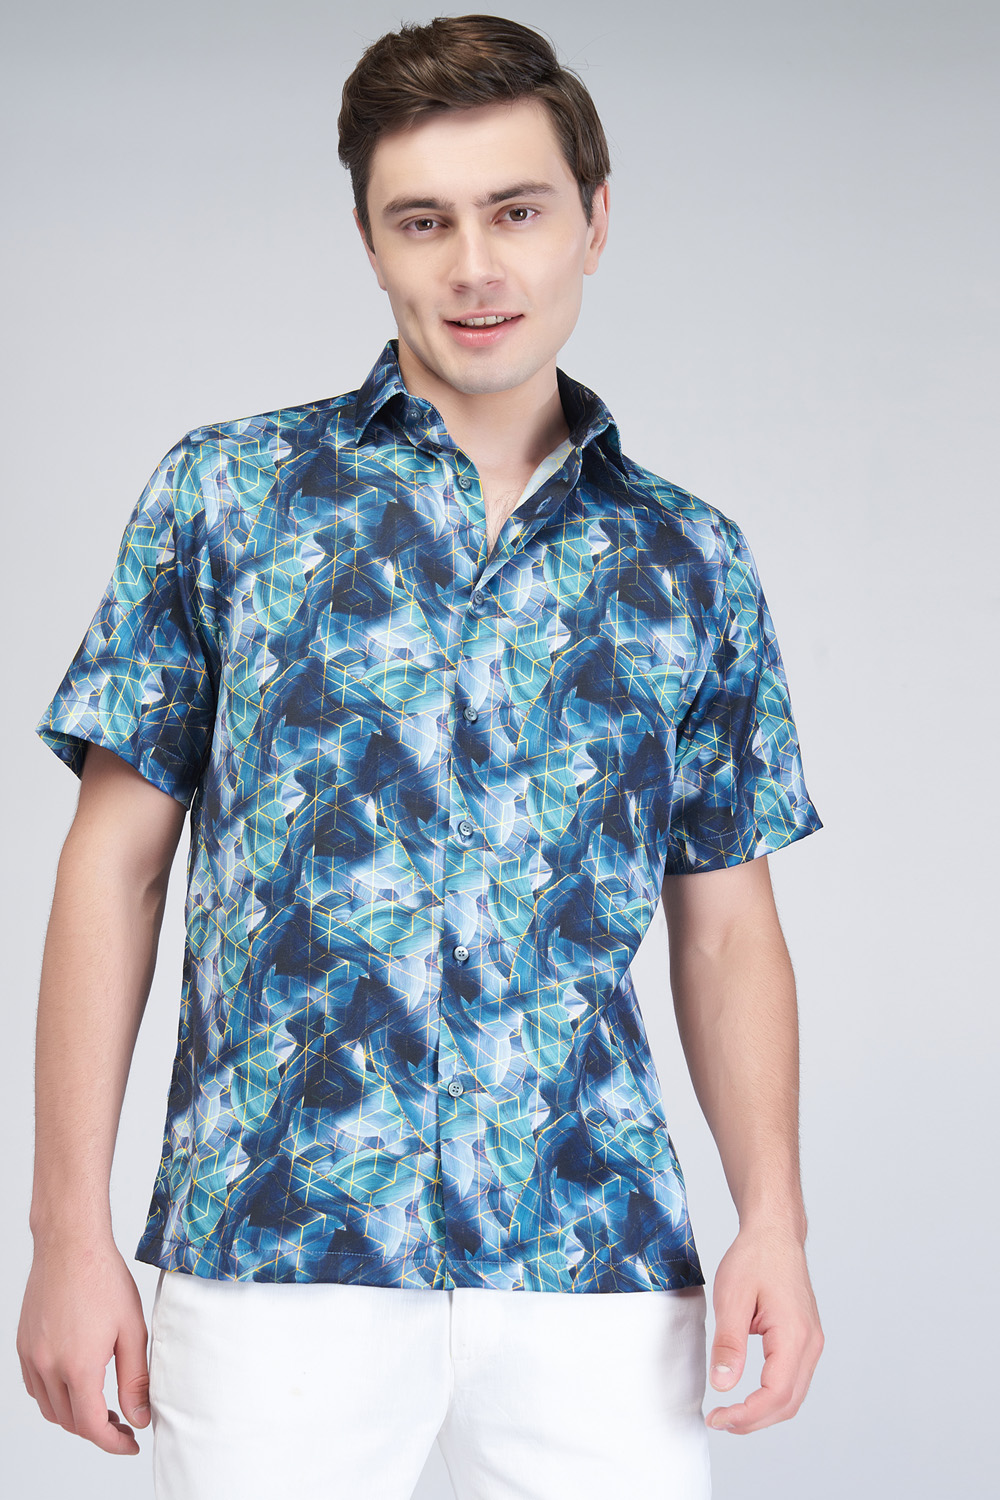 Men’s Clothing for Beach Vacation